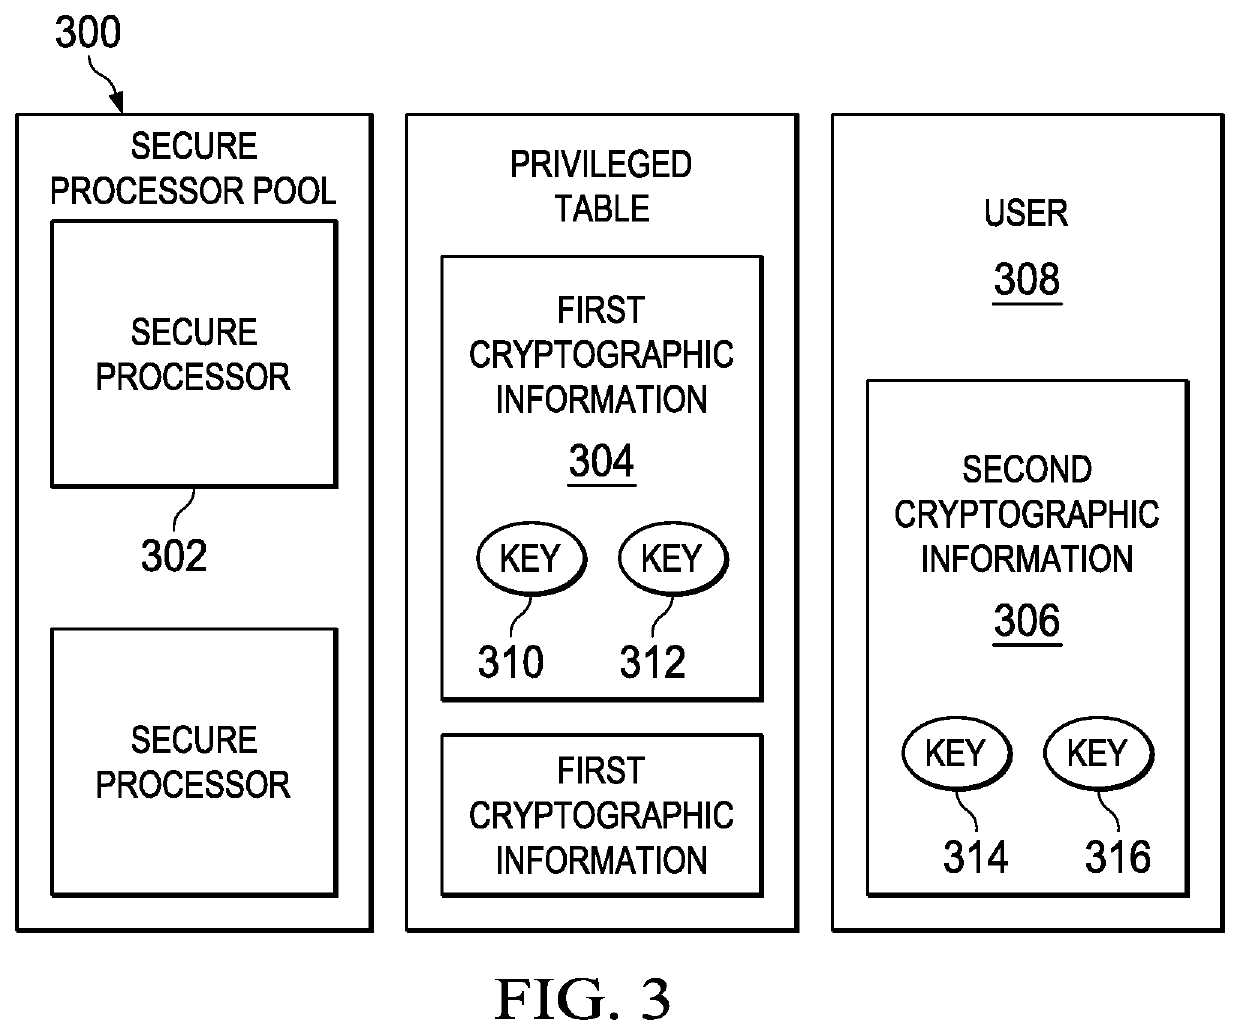 Constructing flexibly-secure systems in a disaggregated environment